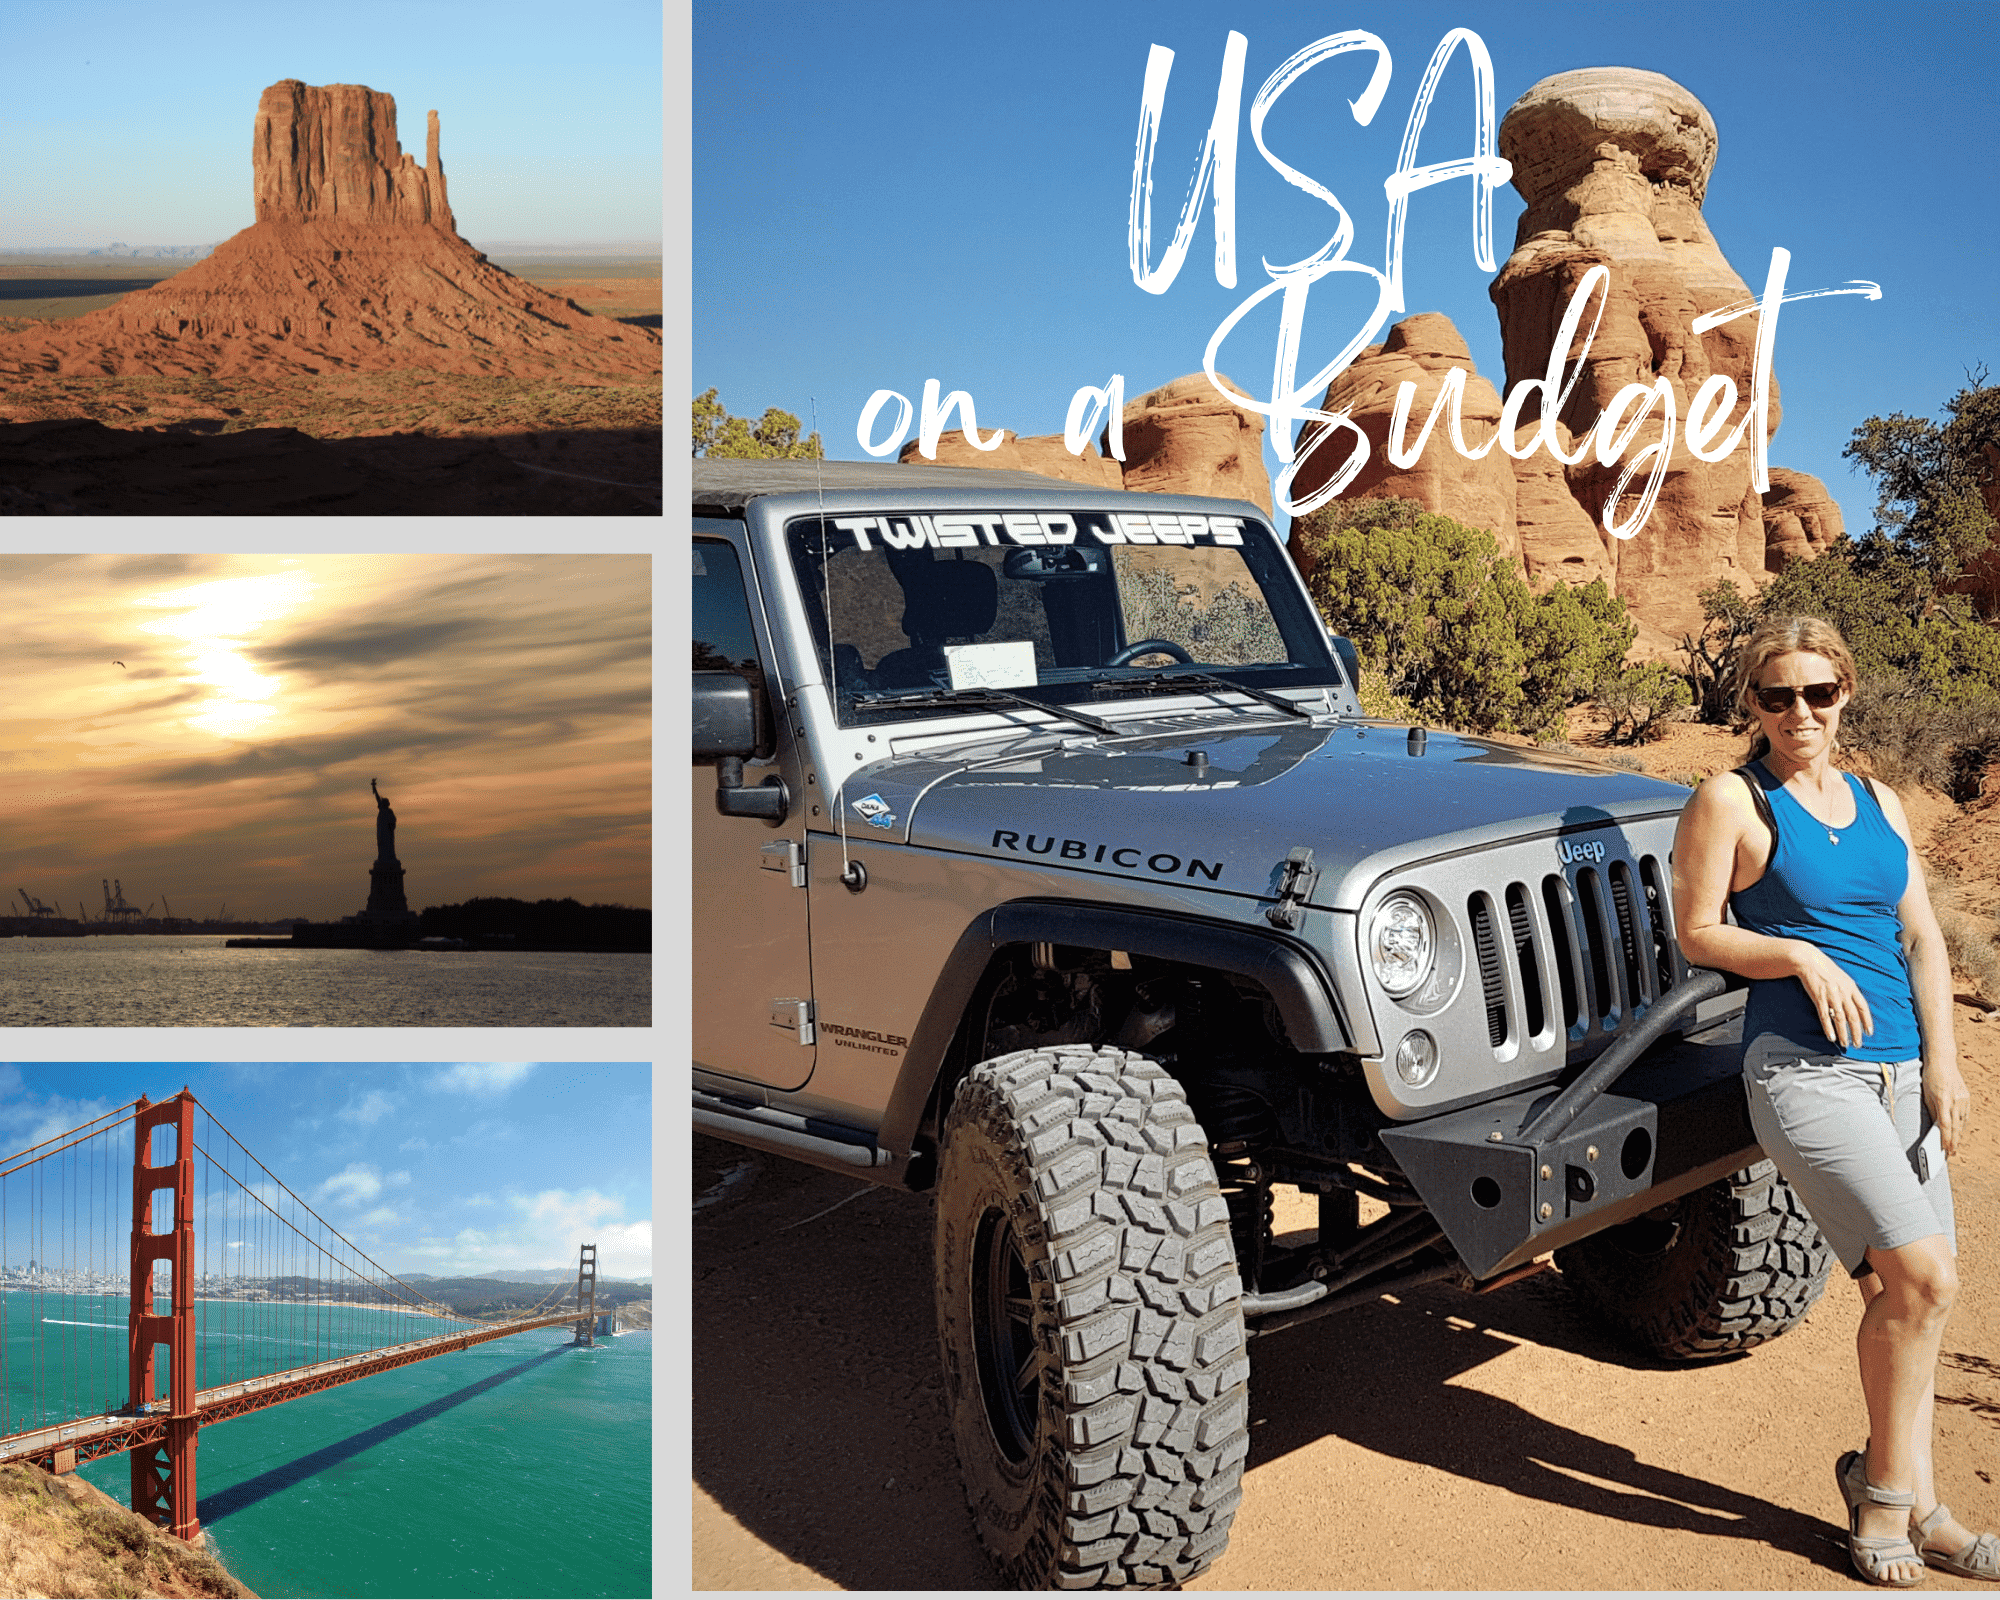 travelling the us on a budget